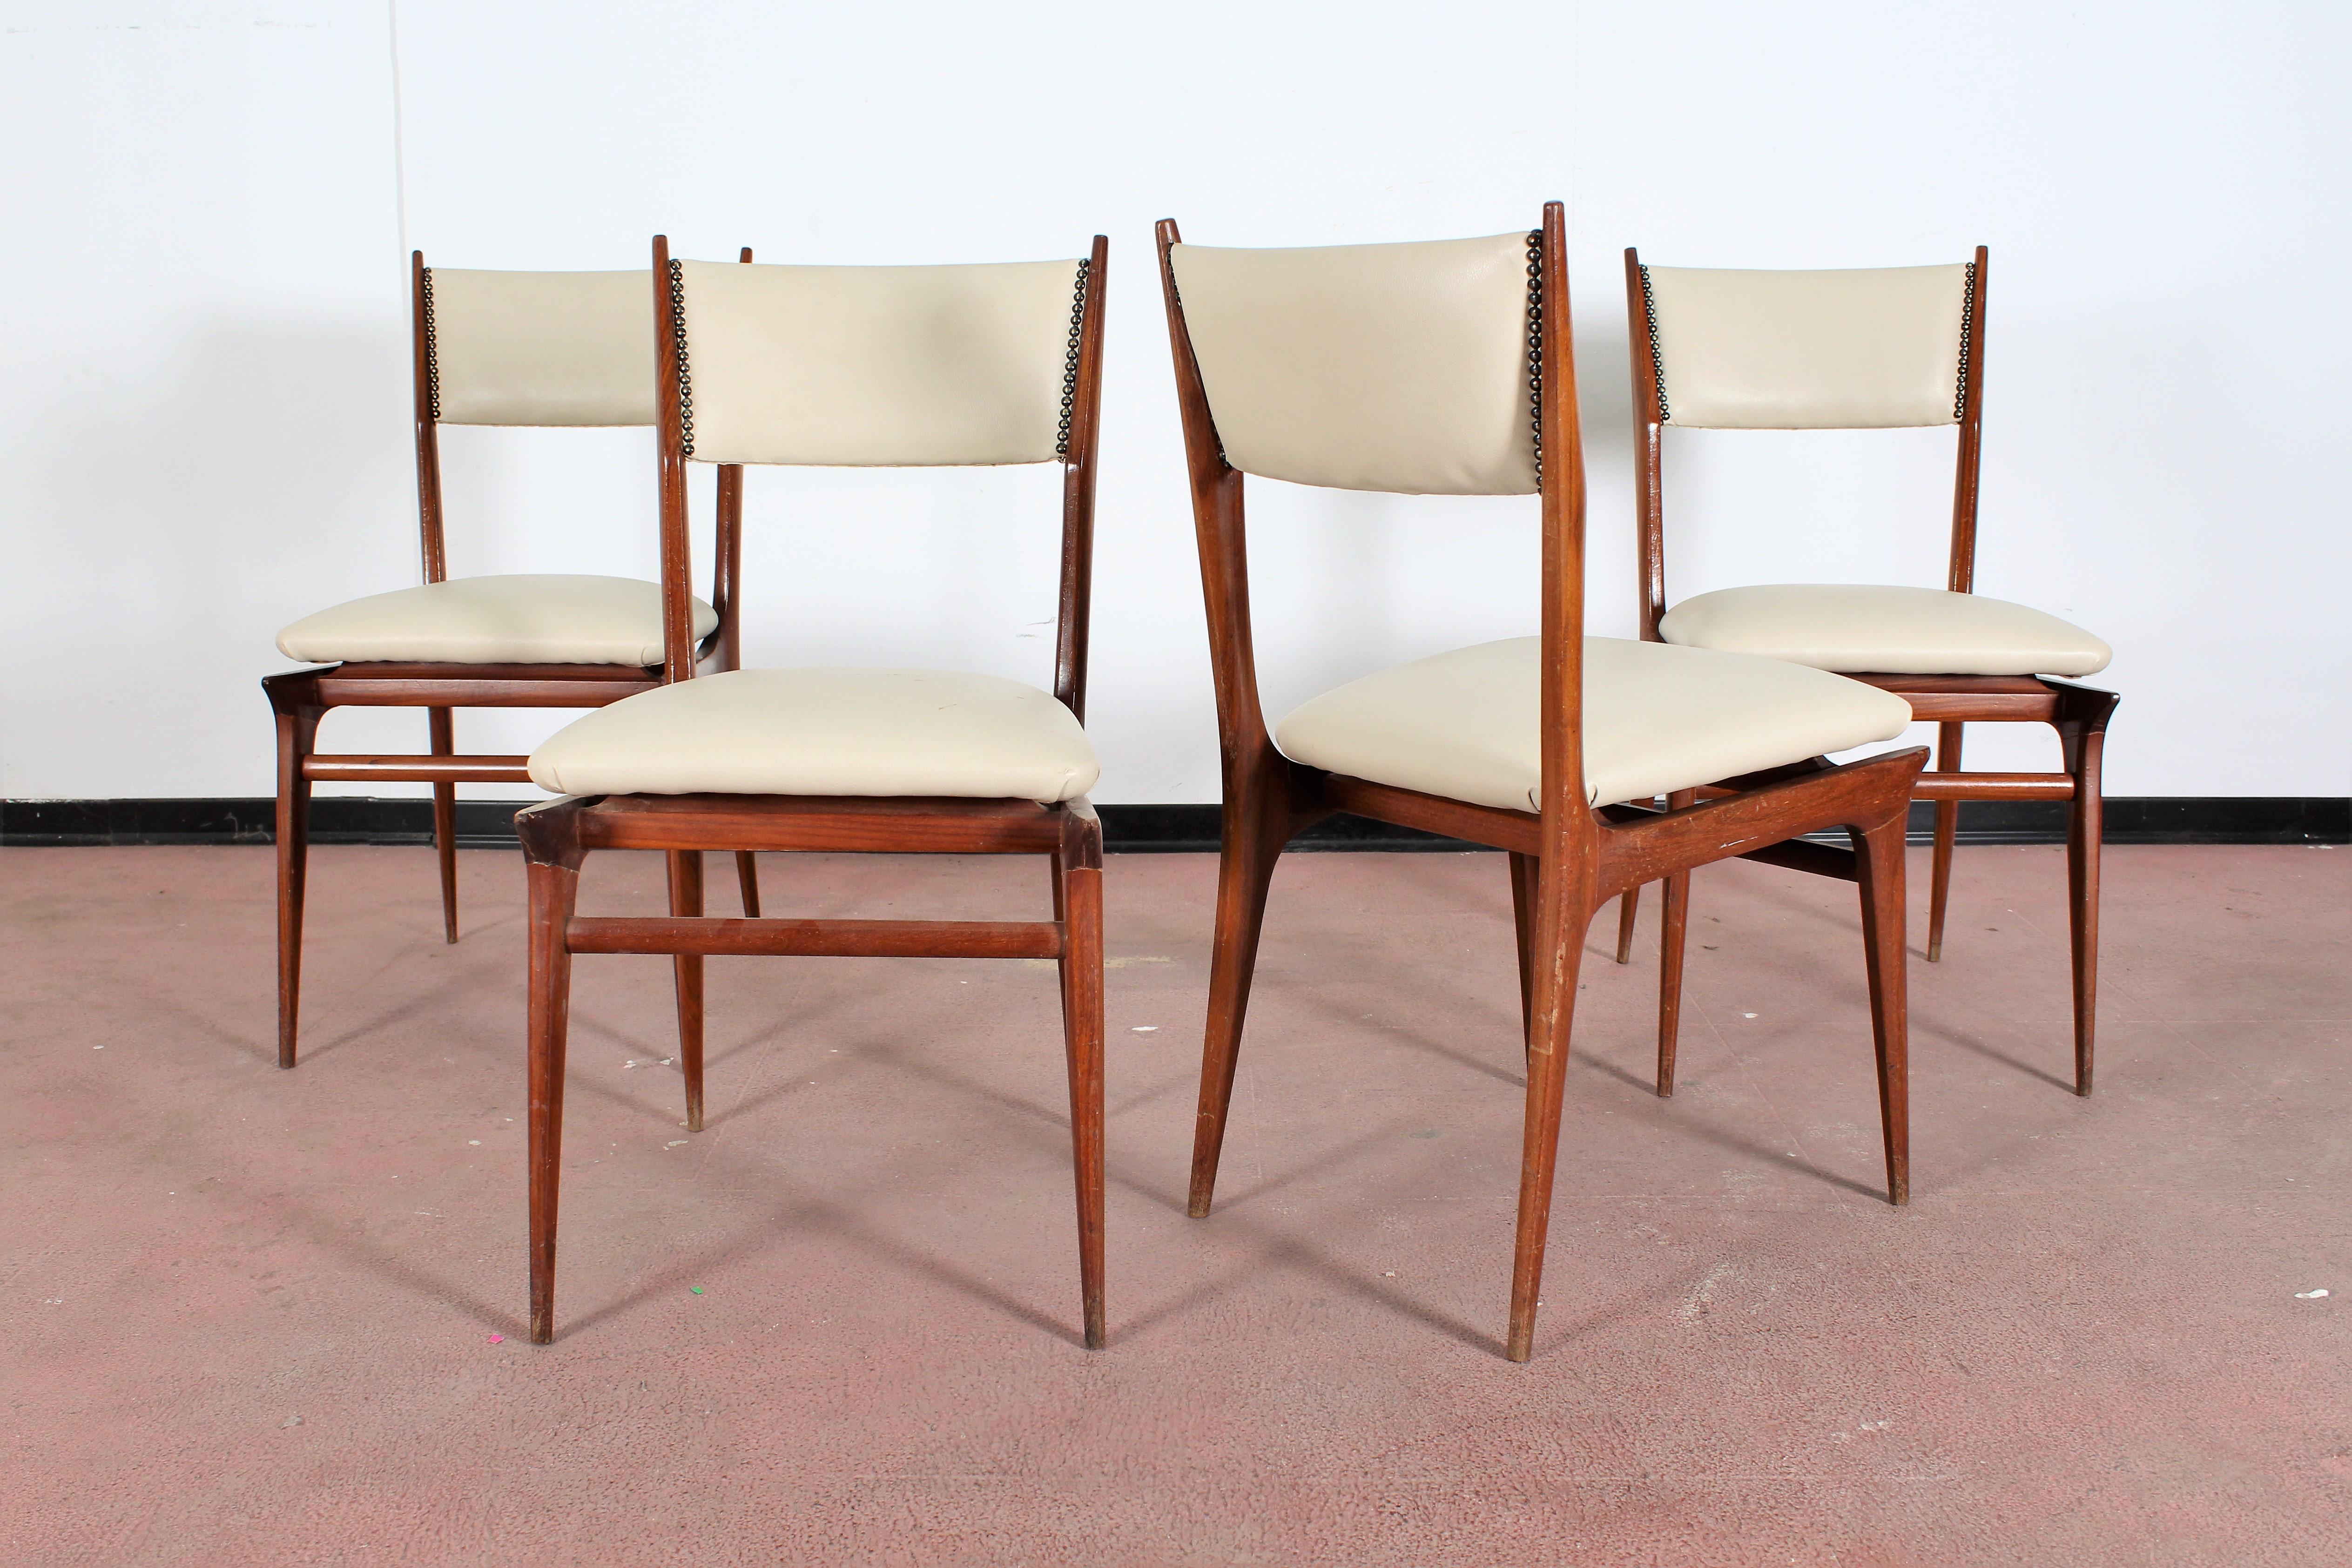 Mid-20th Century Midcentury Wood and Leatherette Chairs Carlo de Carli Italy 1950s Set of 4